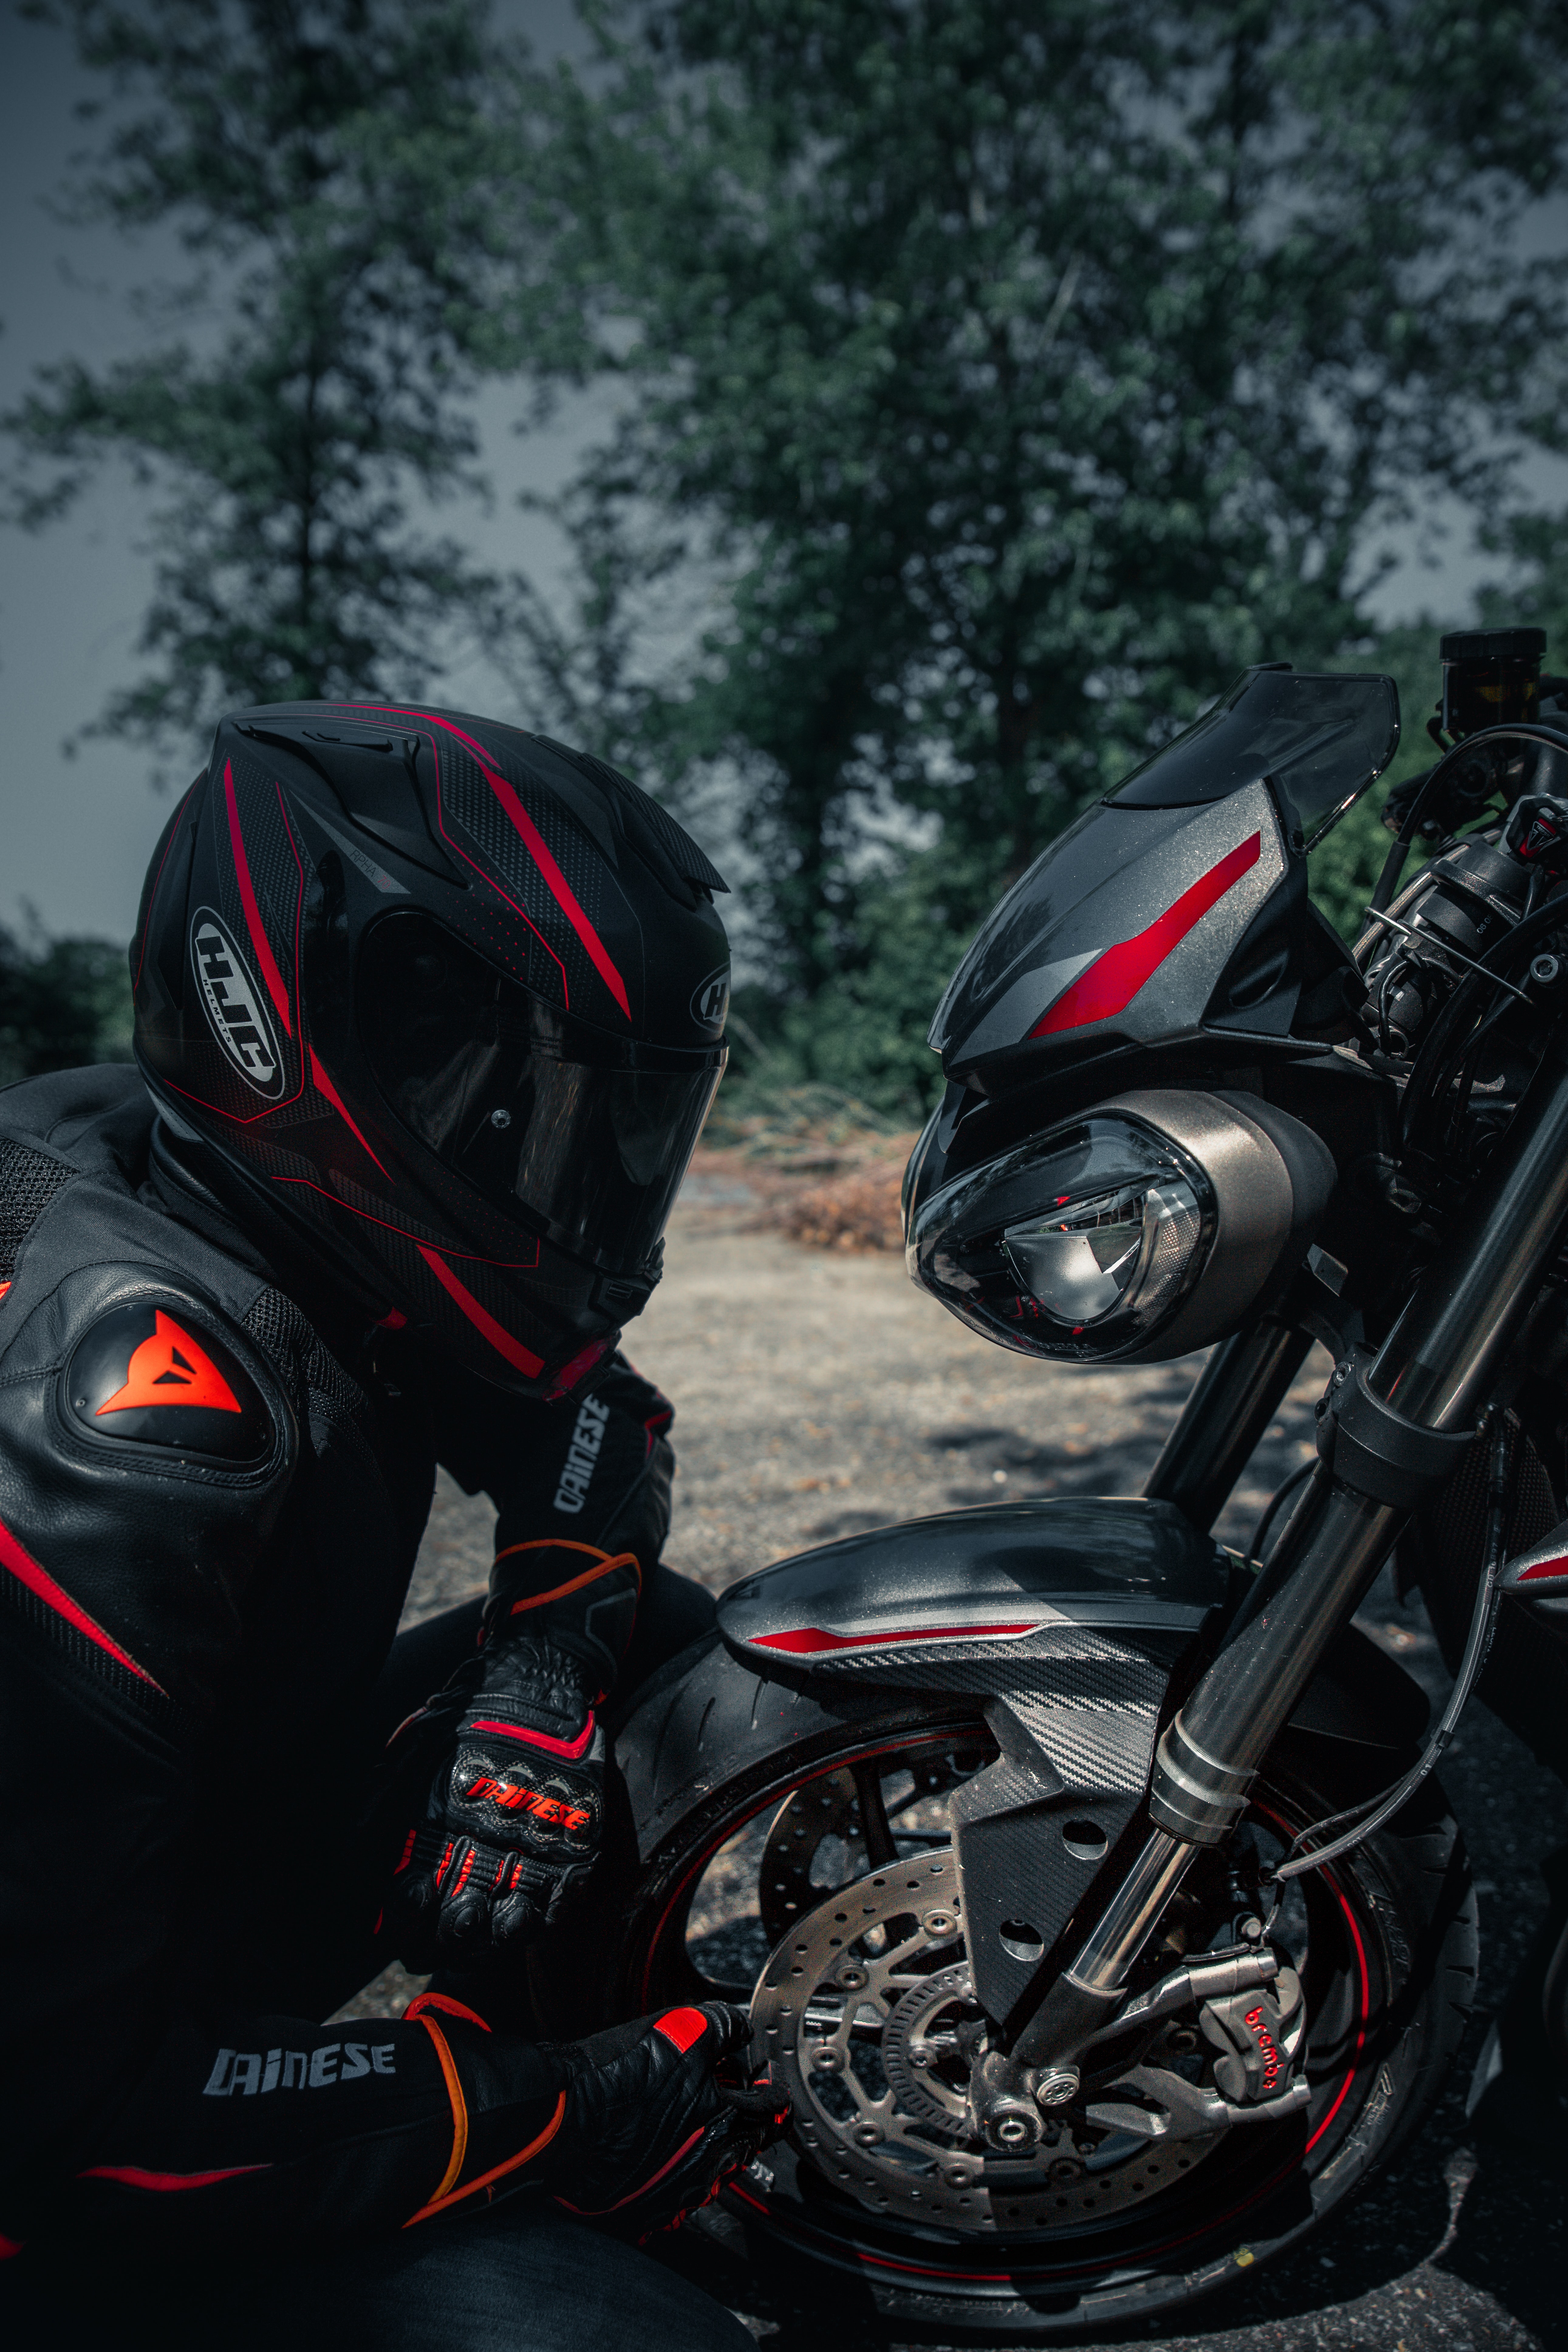 131736 free wallpaper 1080x2340 for phone, download images motorcyclist, helmet, bike, motorcycles 1080x2340 for mobile